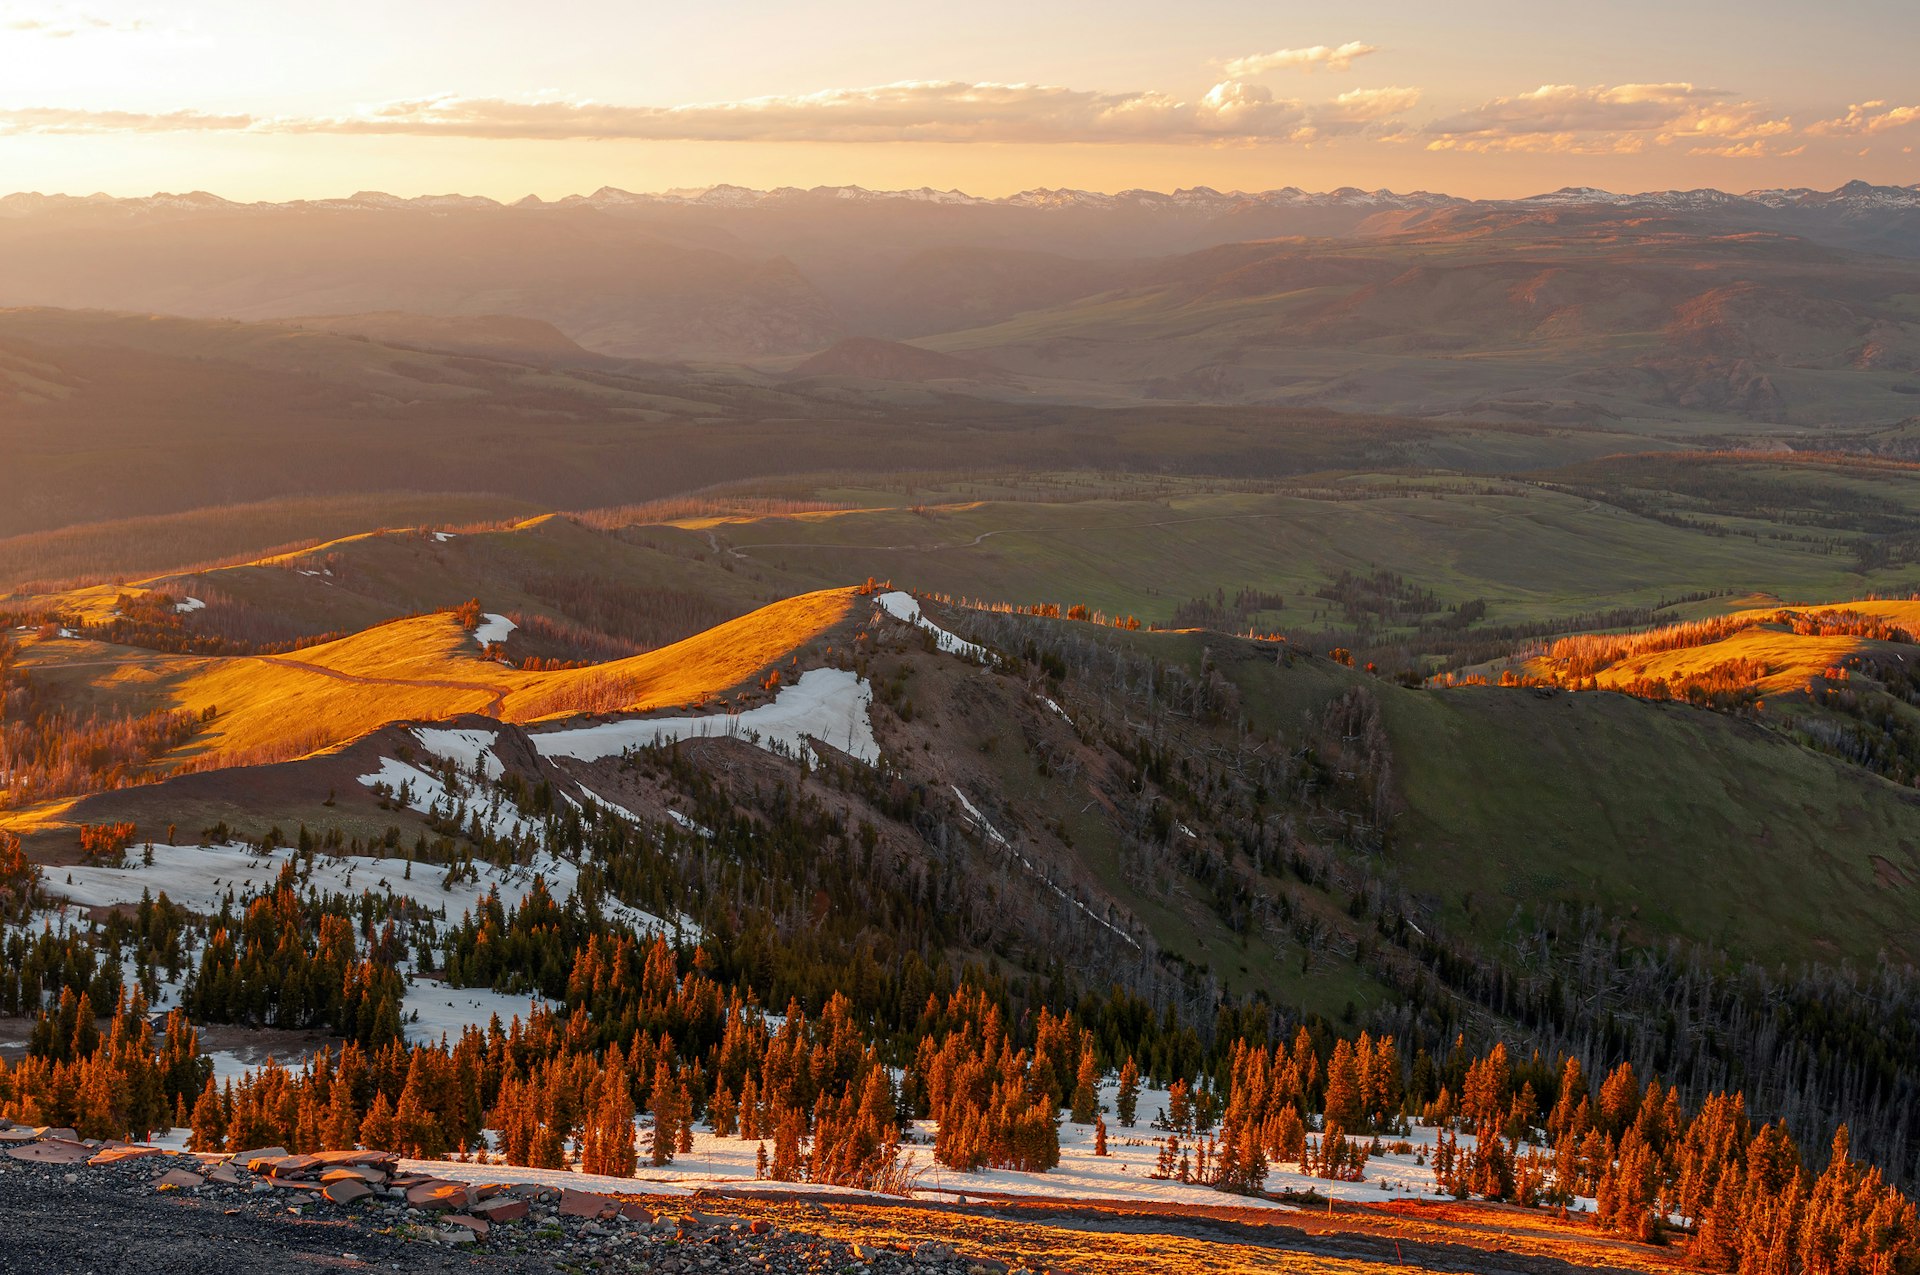 Scenic view of fall colors and light snow from the summit of Mt. Washburn, Yellowstone National Park